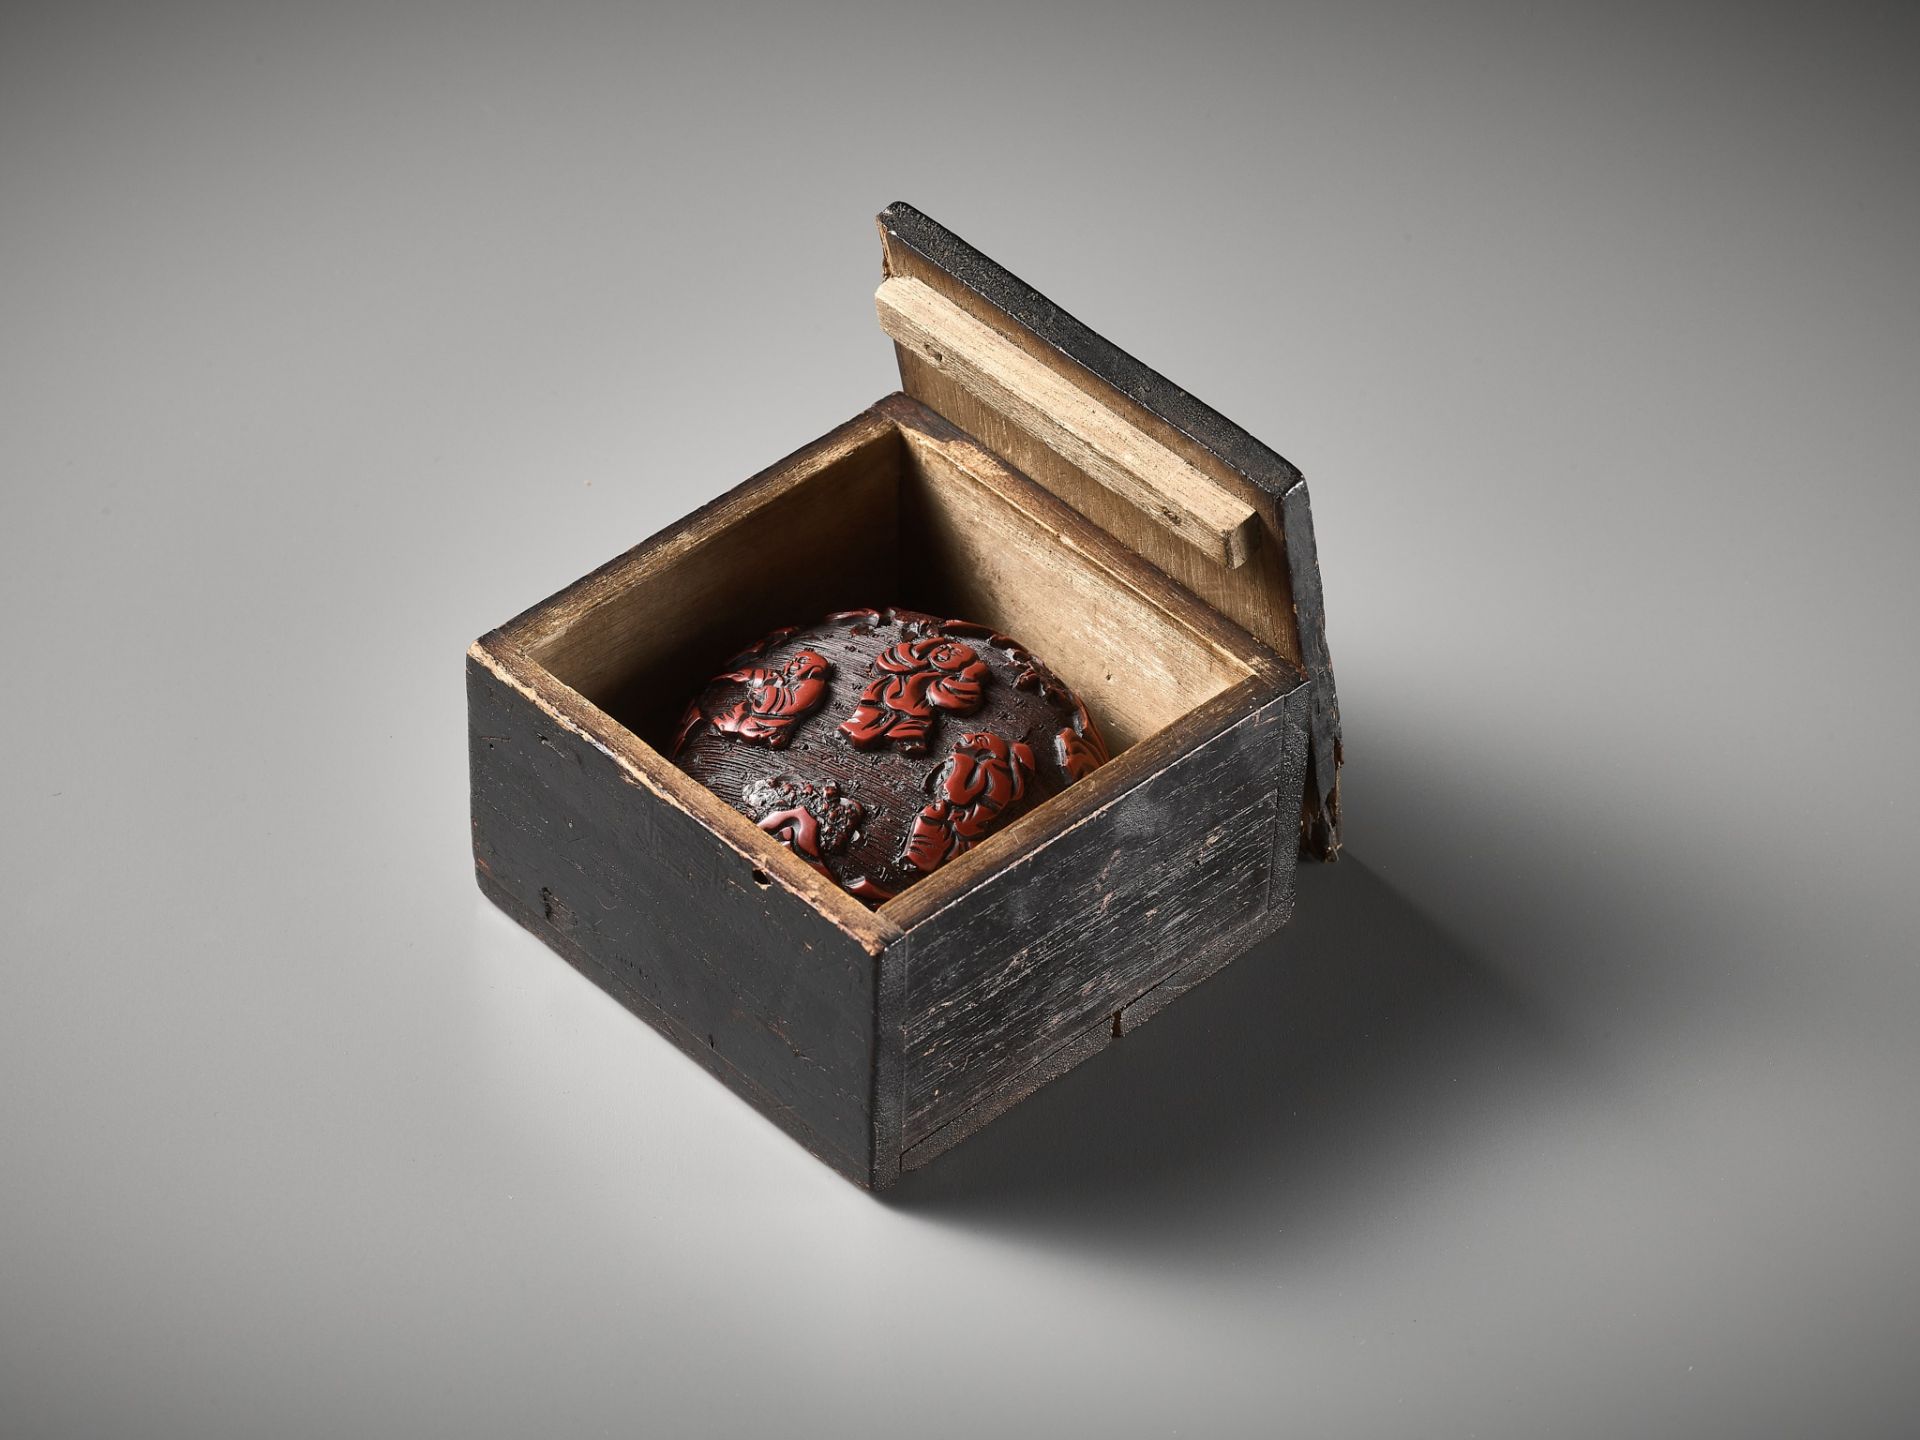 A CINNABAR LACQUER 'PLAYING BOYS' SEAL PASTE BOX AND COVER, MING DYNASTY - Image 6 of 11